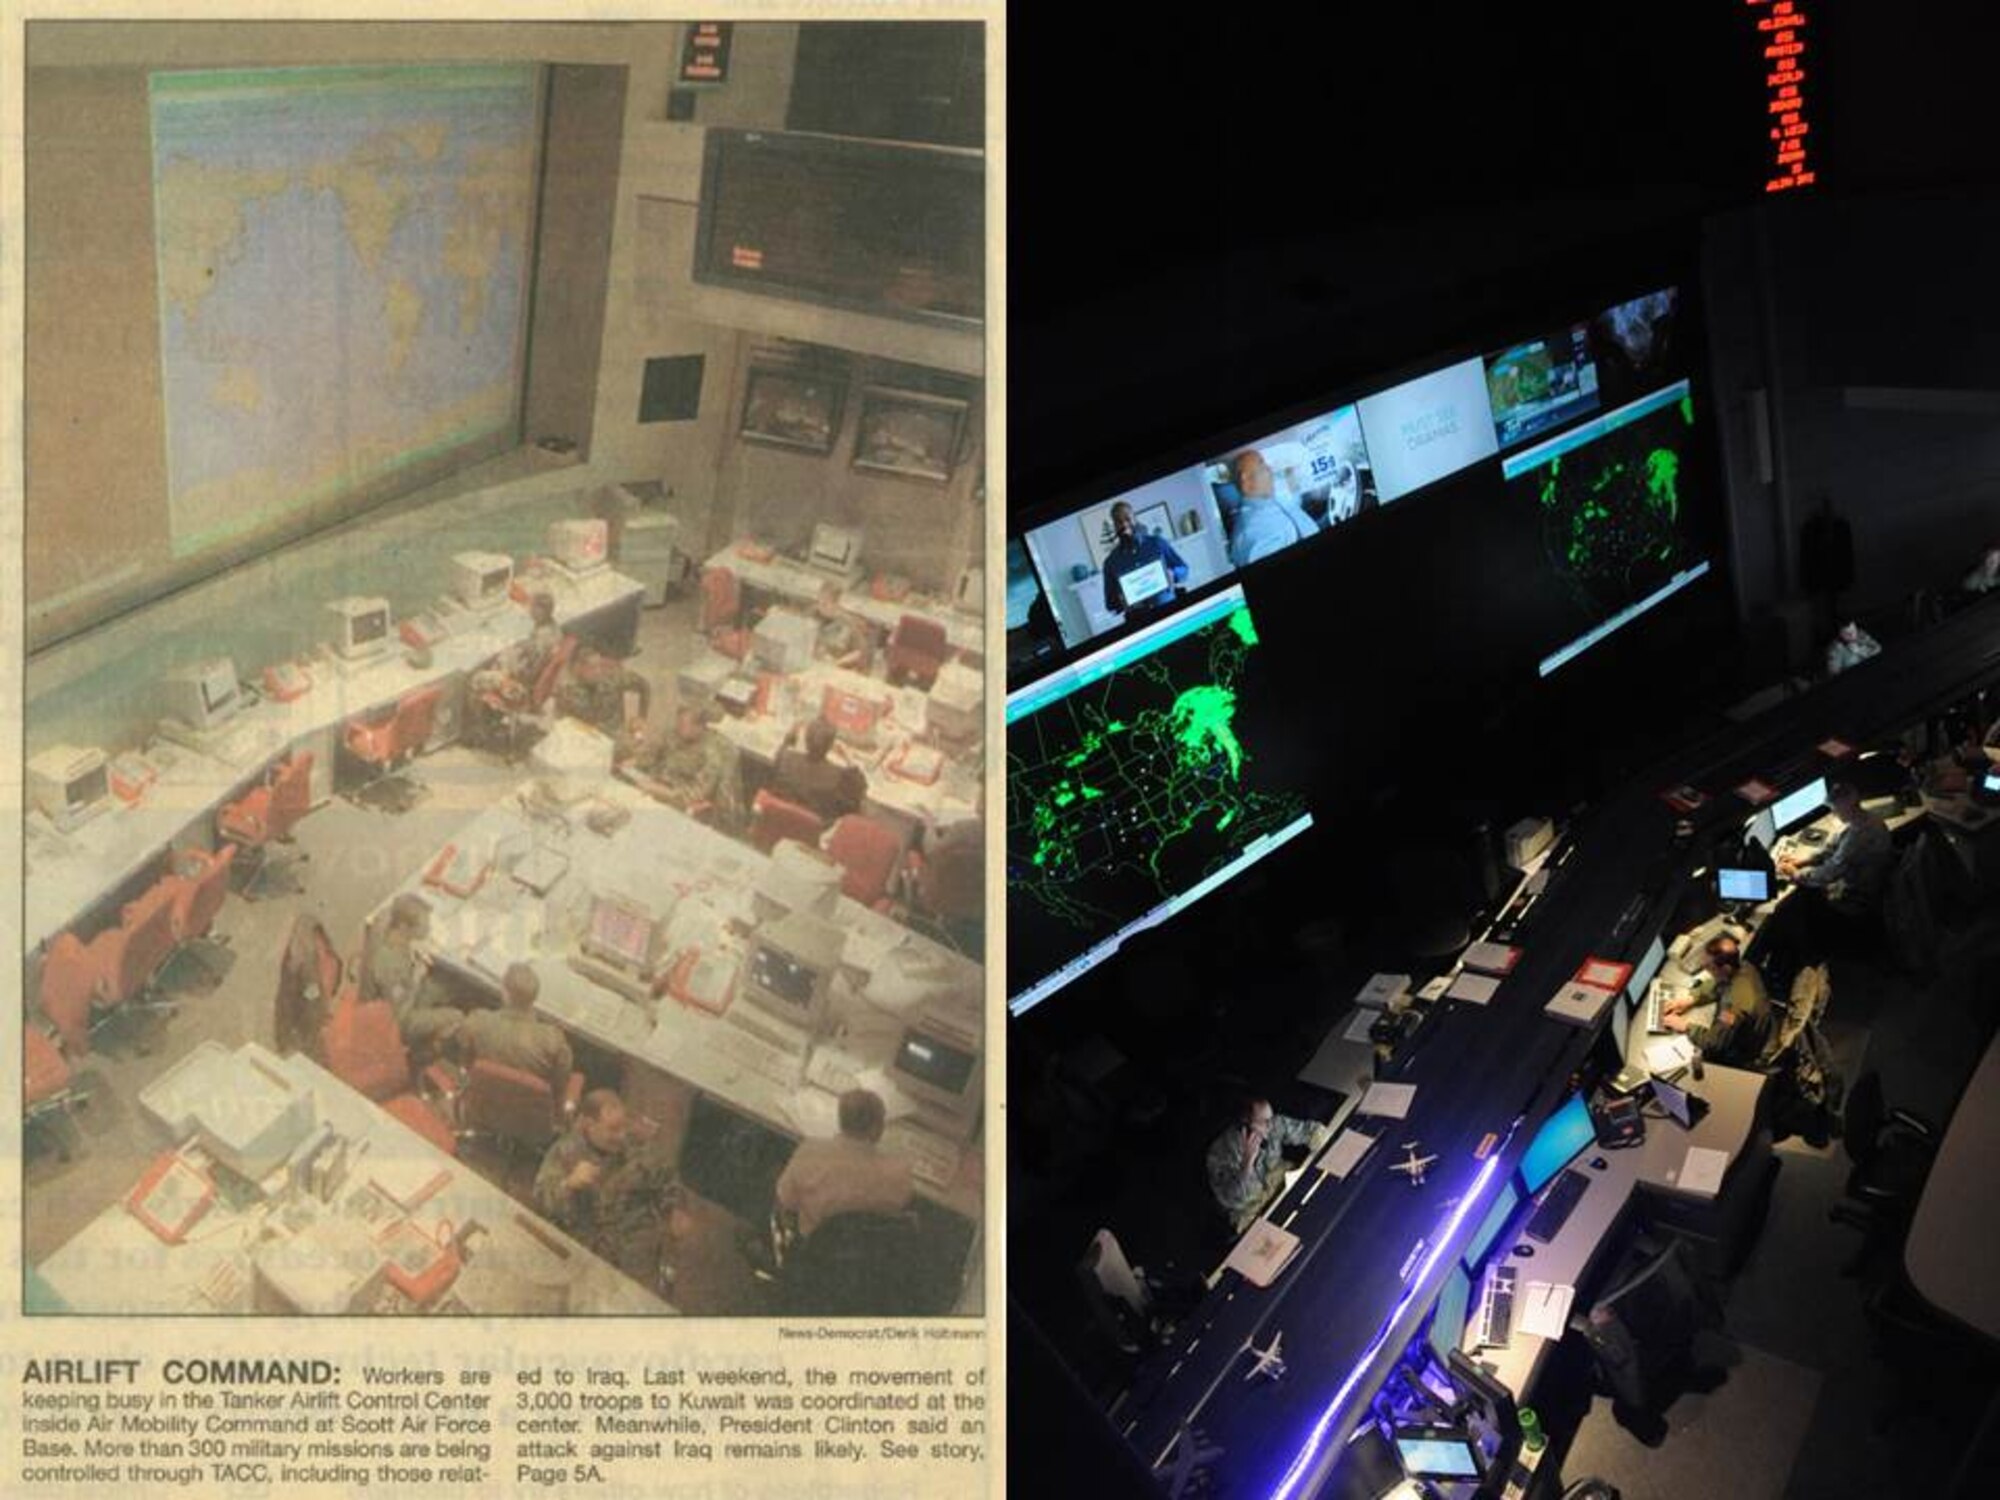 Established April 1, 1992, the 618th Air Operations Center (Tanker Airlift Control Center) celebrates 25 years of enabling aerial and ground operations worldwide through the command and control of airlift and aerial refueling assets. 

The picture on the left was taken in 1998 and next to it is today's 618th AOC (TACC). A lot has changed in the past quarter-century, but the unwavering support AMC’s “crown jewel” has provided to global operations has remained the same.   